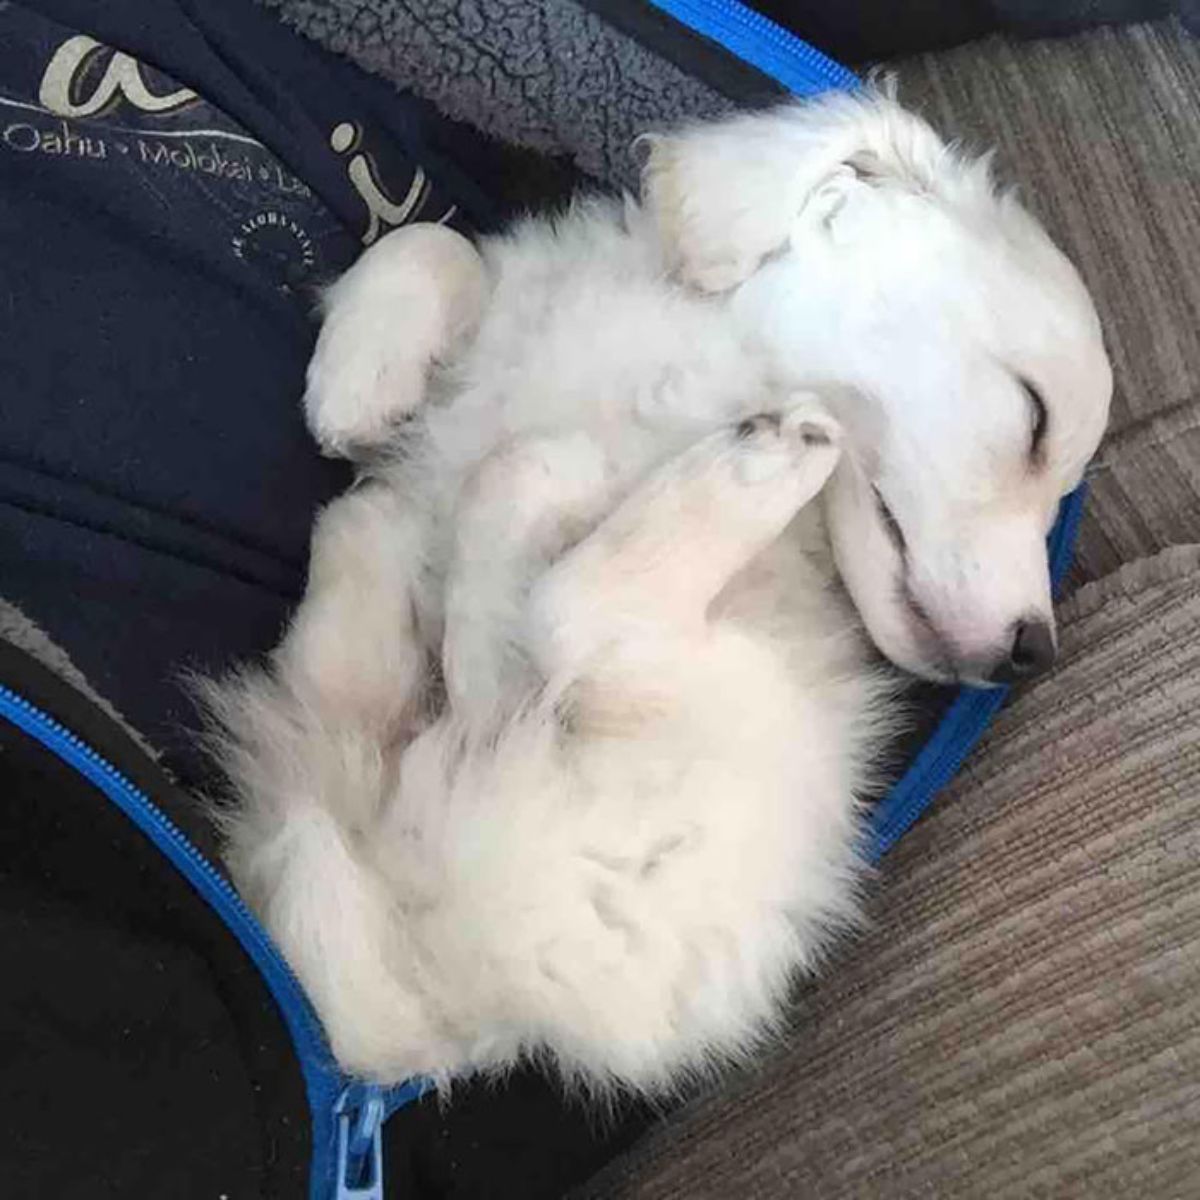 fluffy white puppy sleeping belly up on someone's lap